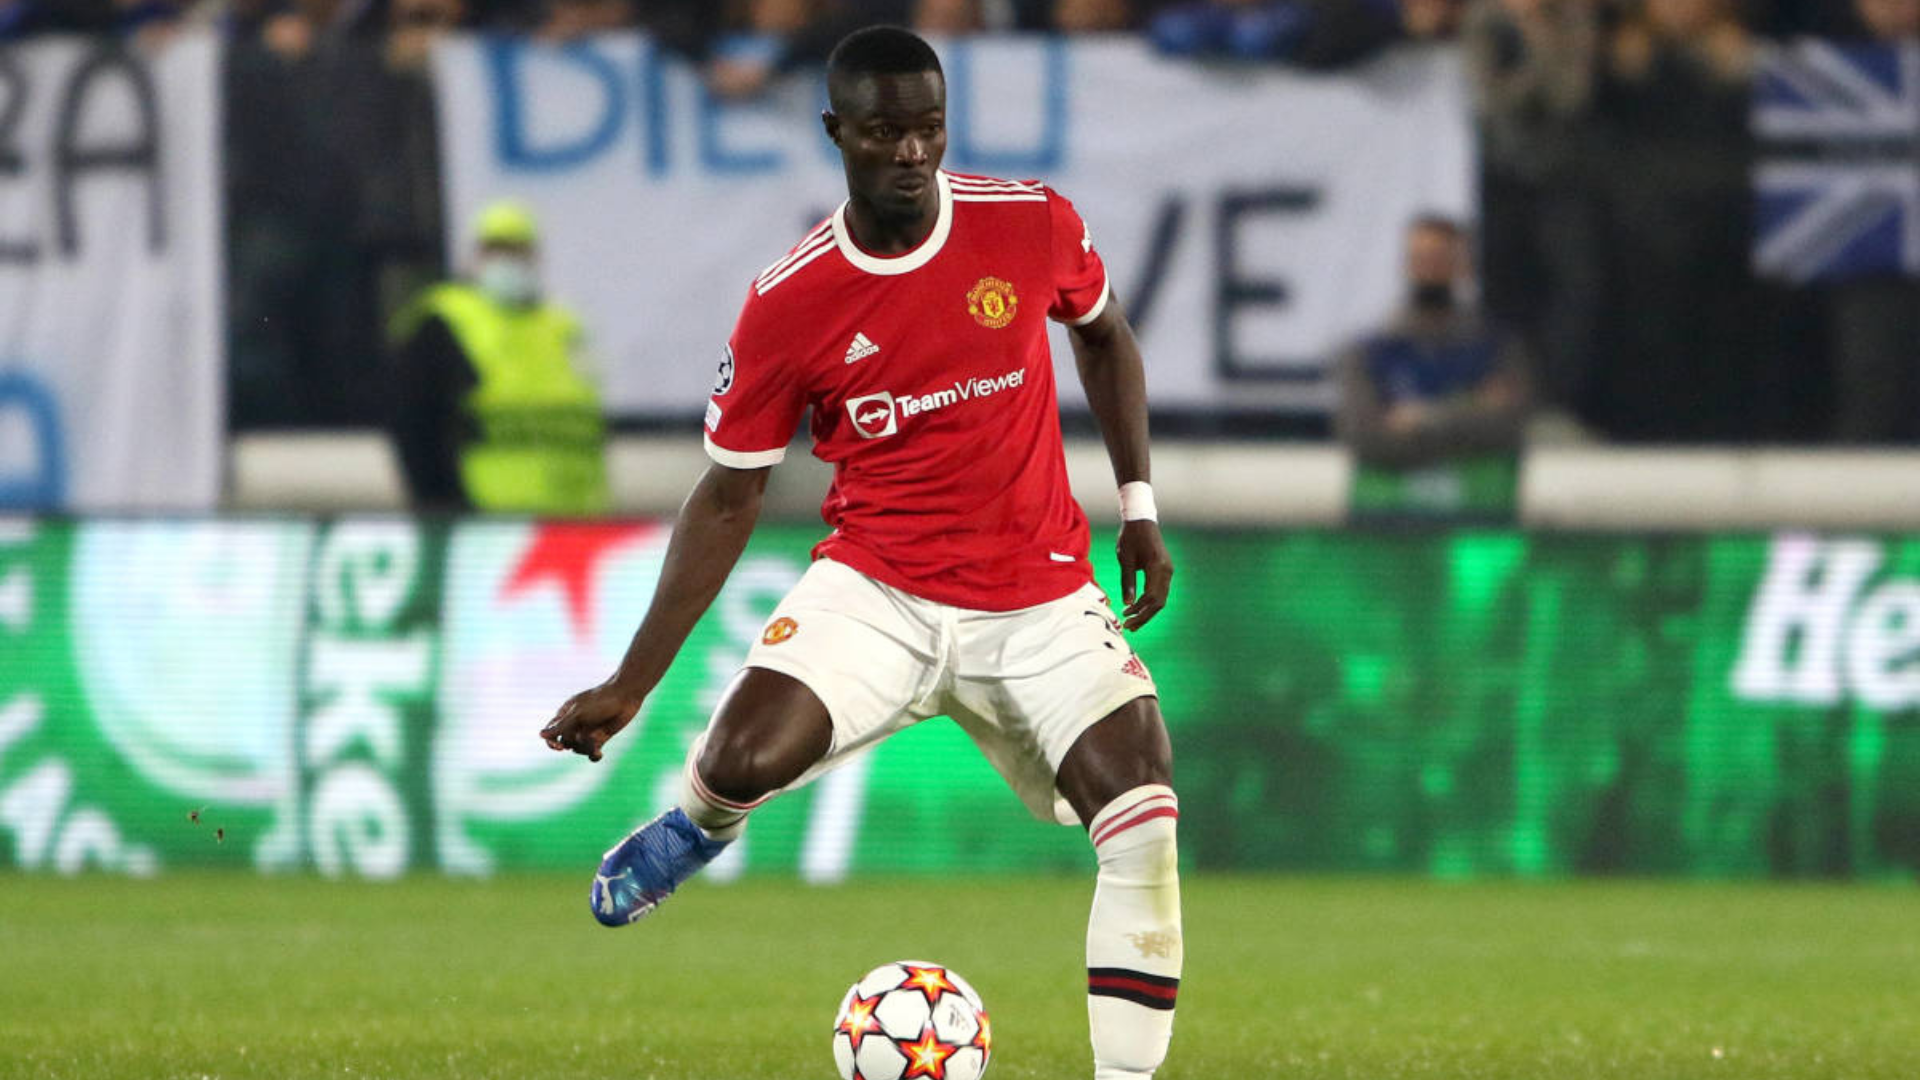 Eric Bailly playing football and about to kick the ball